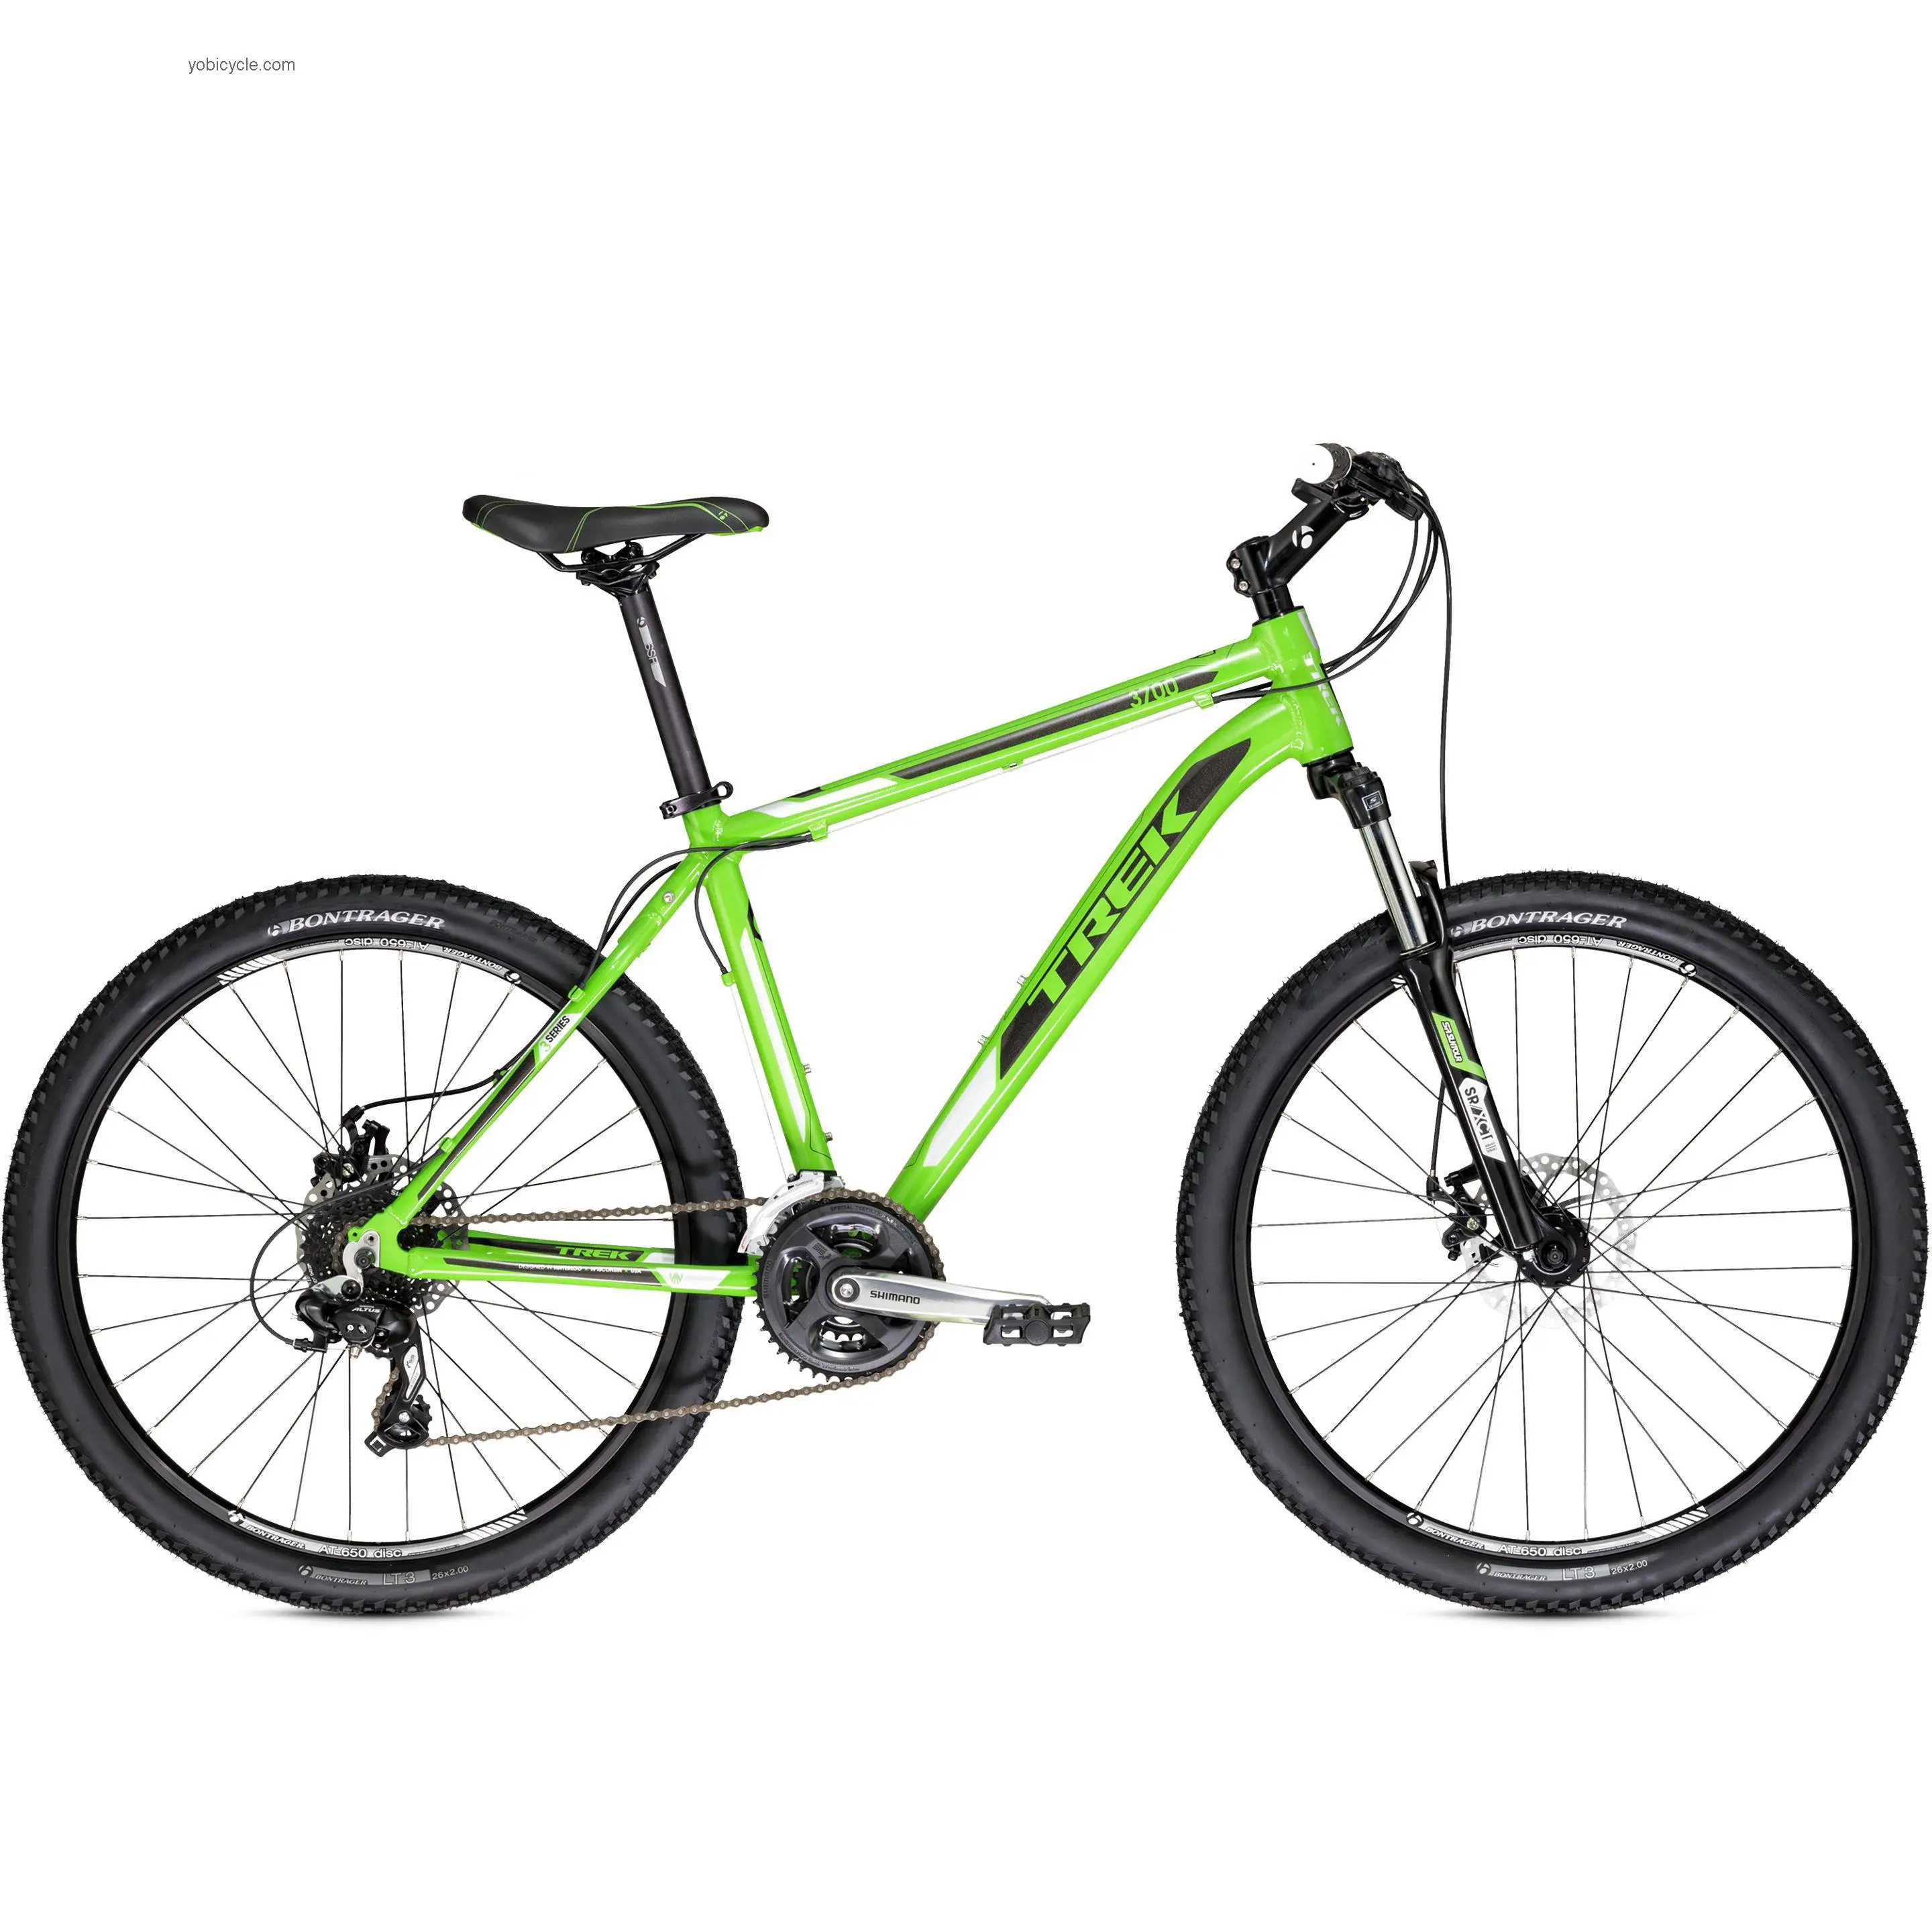 Trek 3700 Disc competitors and comparison tool online specs and performance